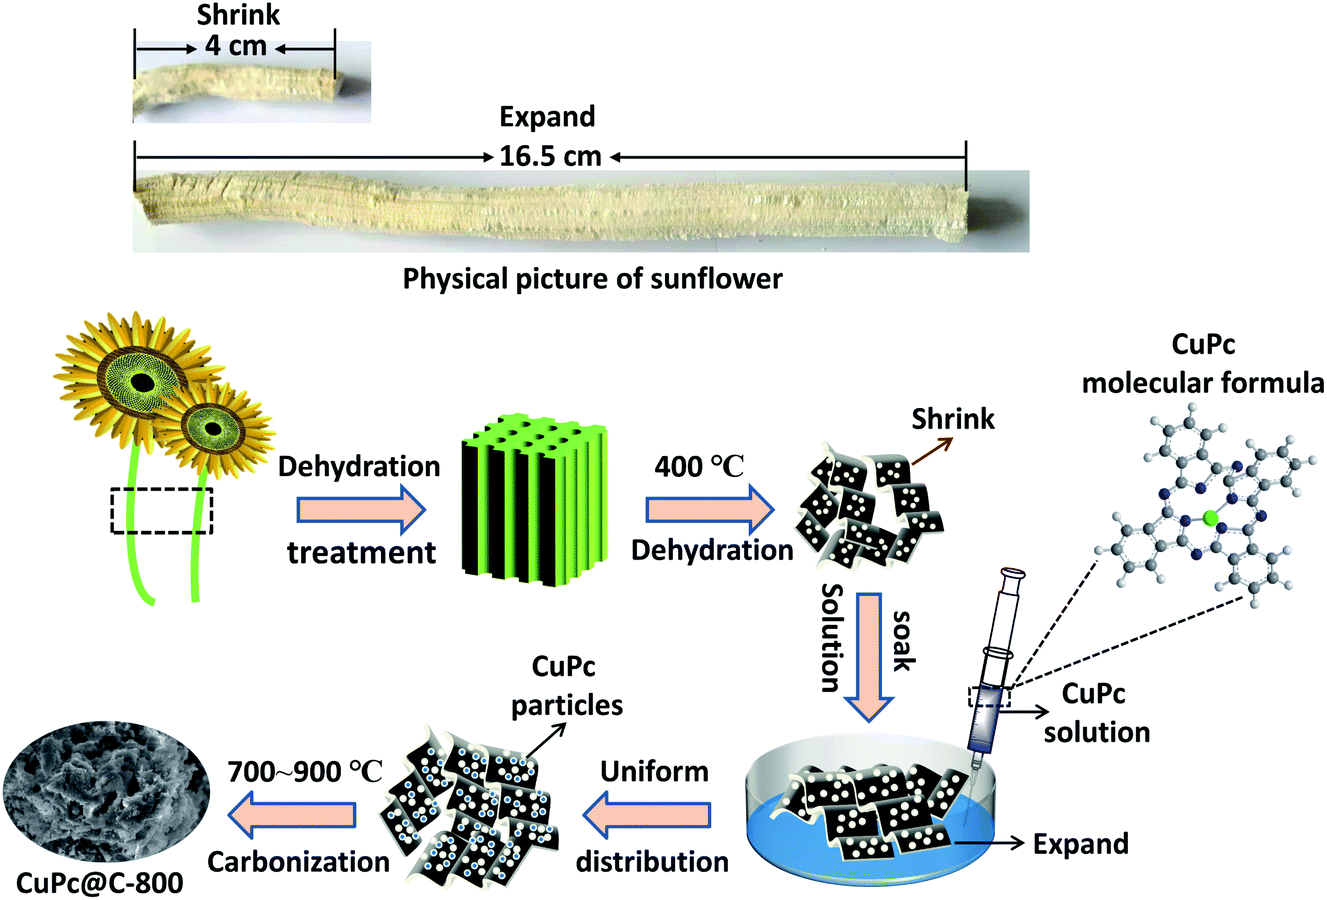 A novel and low-cost CuPc@C catalyst derived from the compounds of sunflower straw copper phthalocyanine pigment for oxygen reduction reaction - RSC Advances (RSC Publishing) DOI:10.1039/D1RA01775F